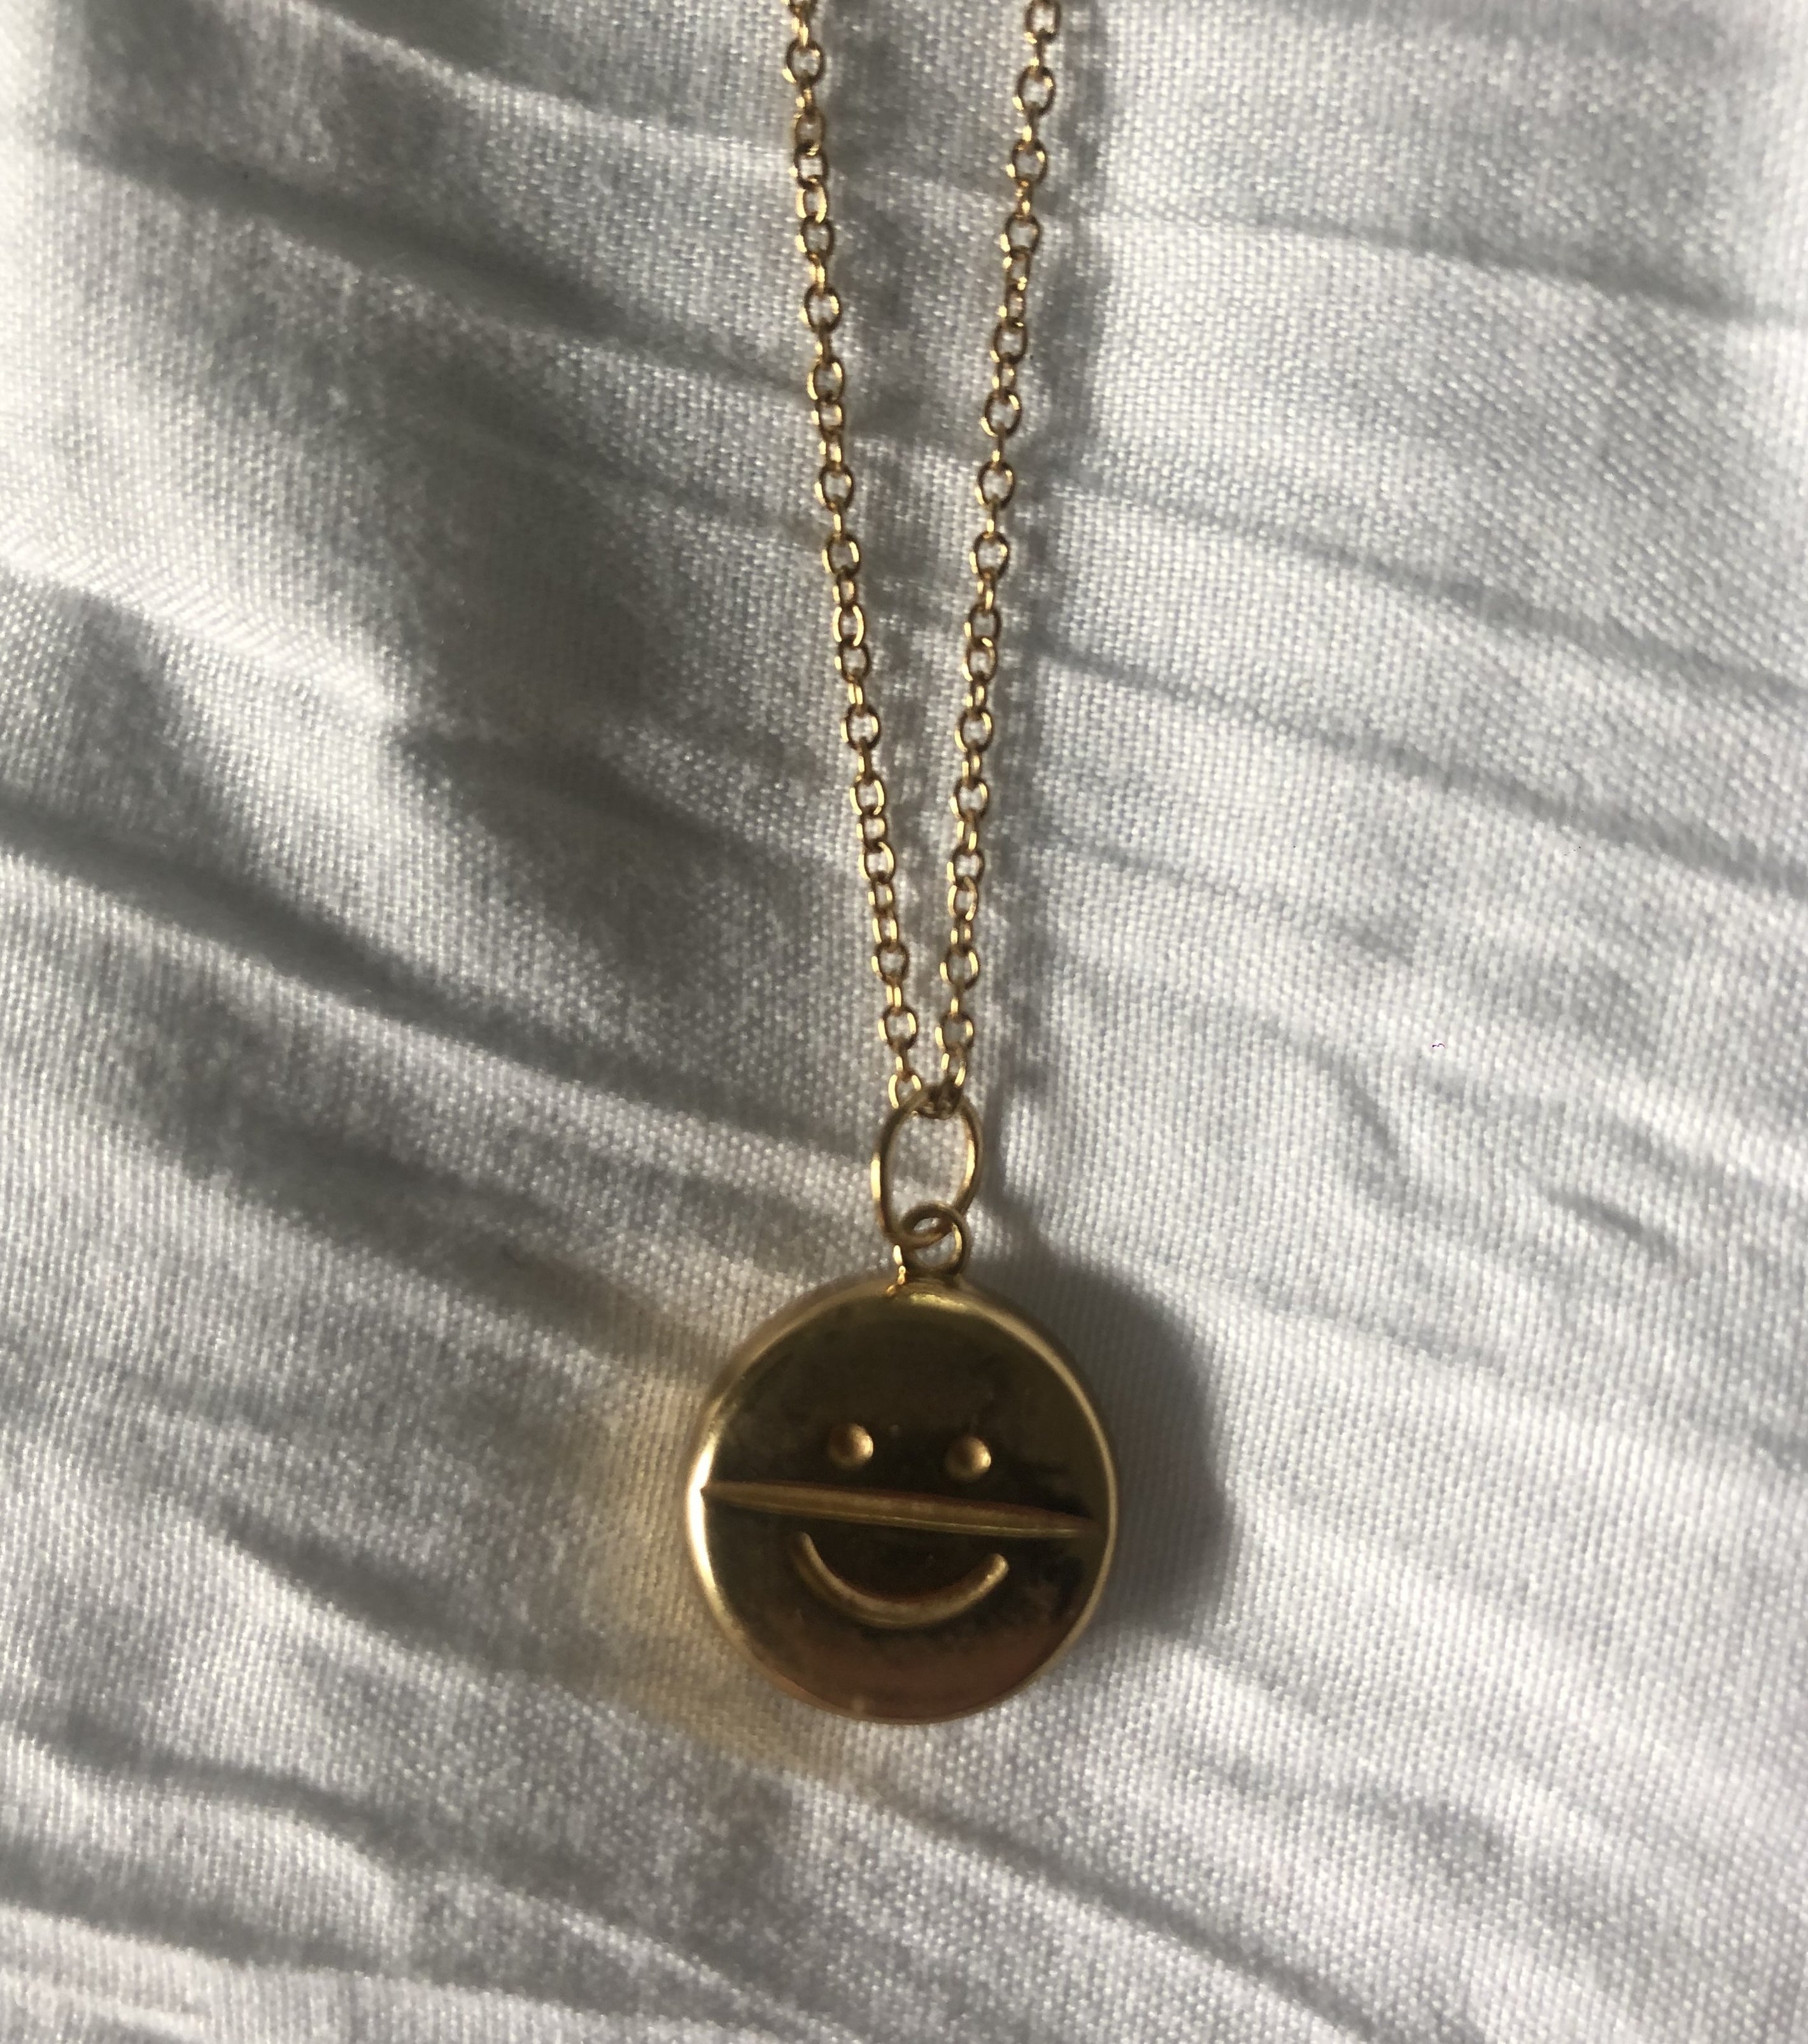 gold necklace with a gold charm of a smiley face on an antidepressant pill